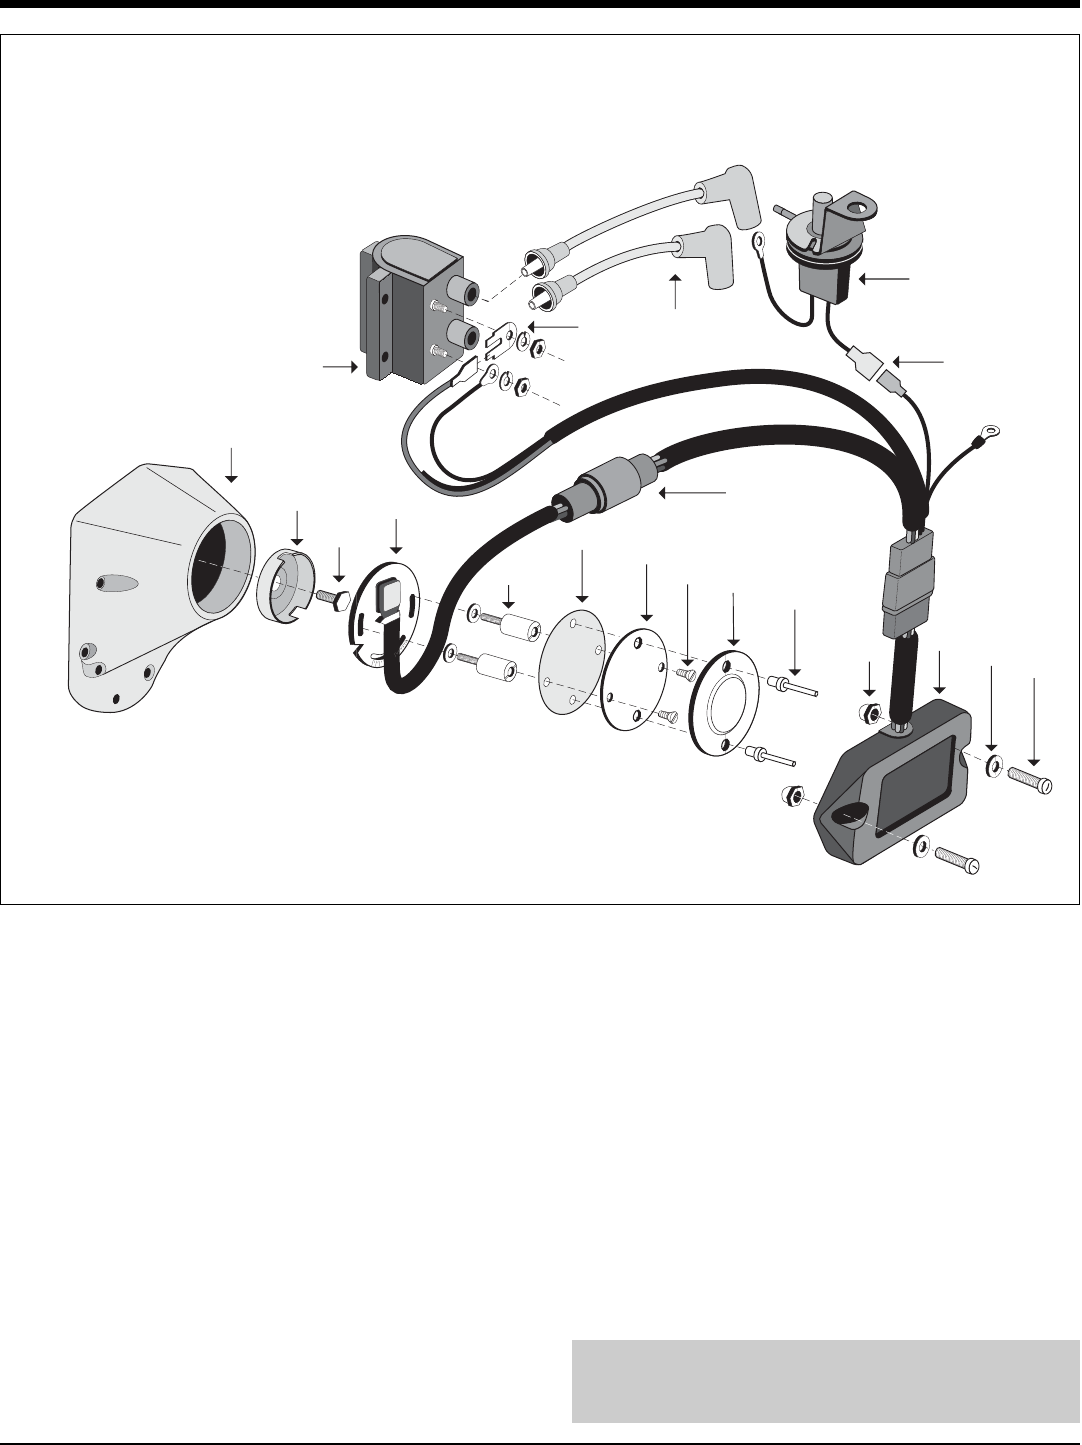 HI-4 SINGLE FIRE MOTORCYCLE IGNITION Part Number 8 · PDF  file · 2010-06-03HI-4 Ignition With Single Plug Heads.Use Crane  8-3001 coil. ... HI-4 SINGLE FIRE MOTORCYCLE IGNITION Part  Crane Hi 4 Ignition Wiring Diagram    PDFSLIDE.NET